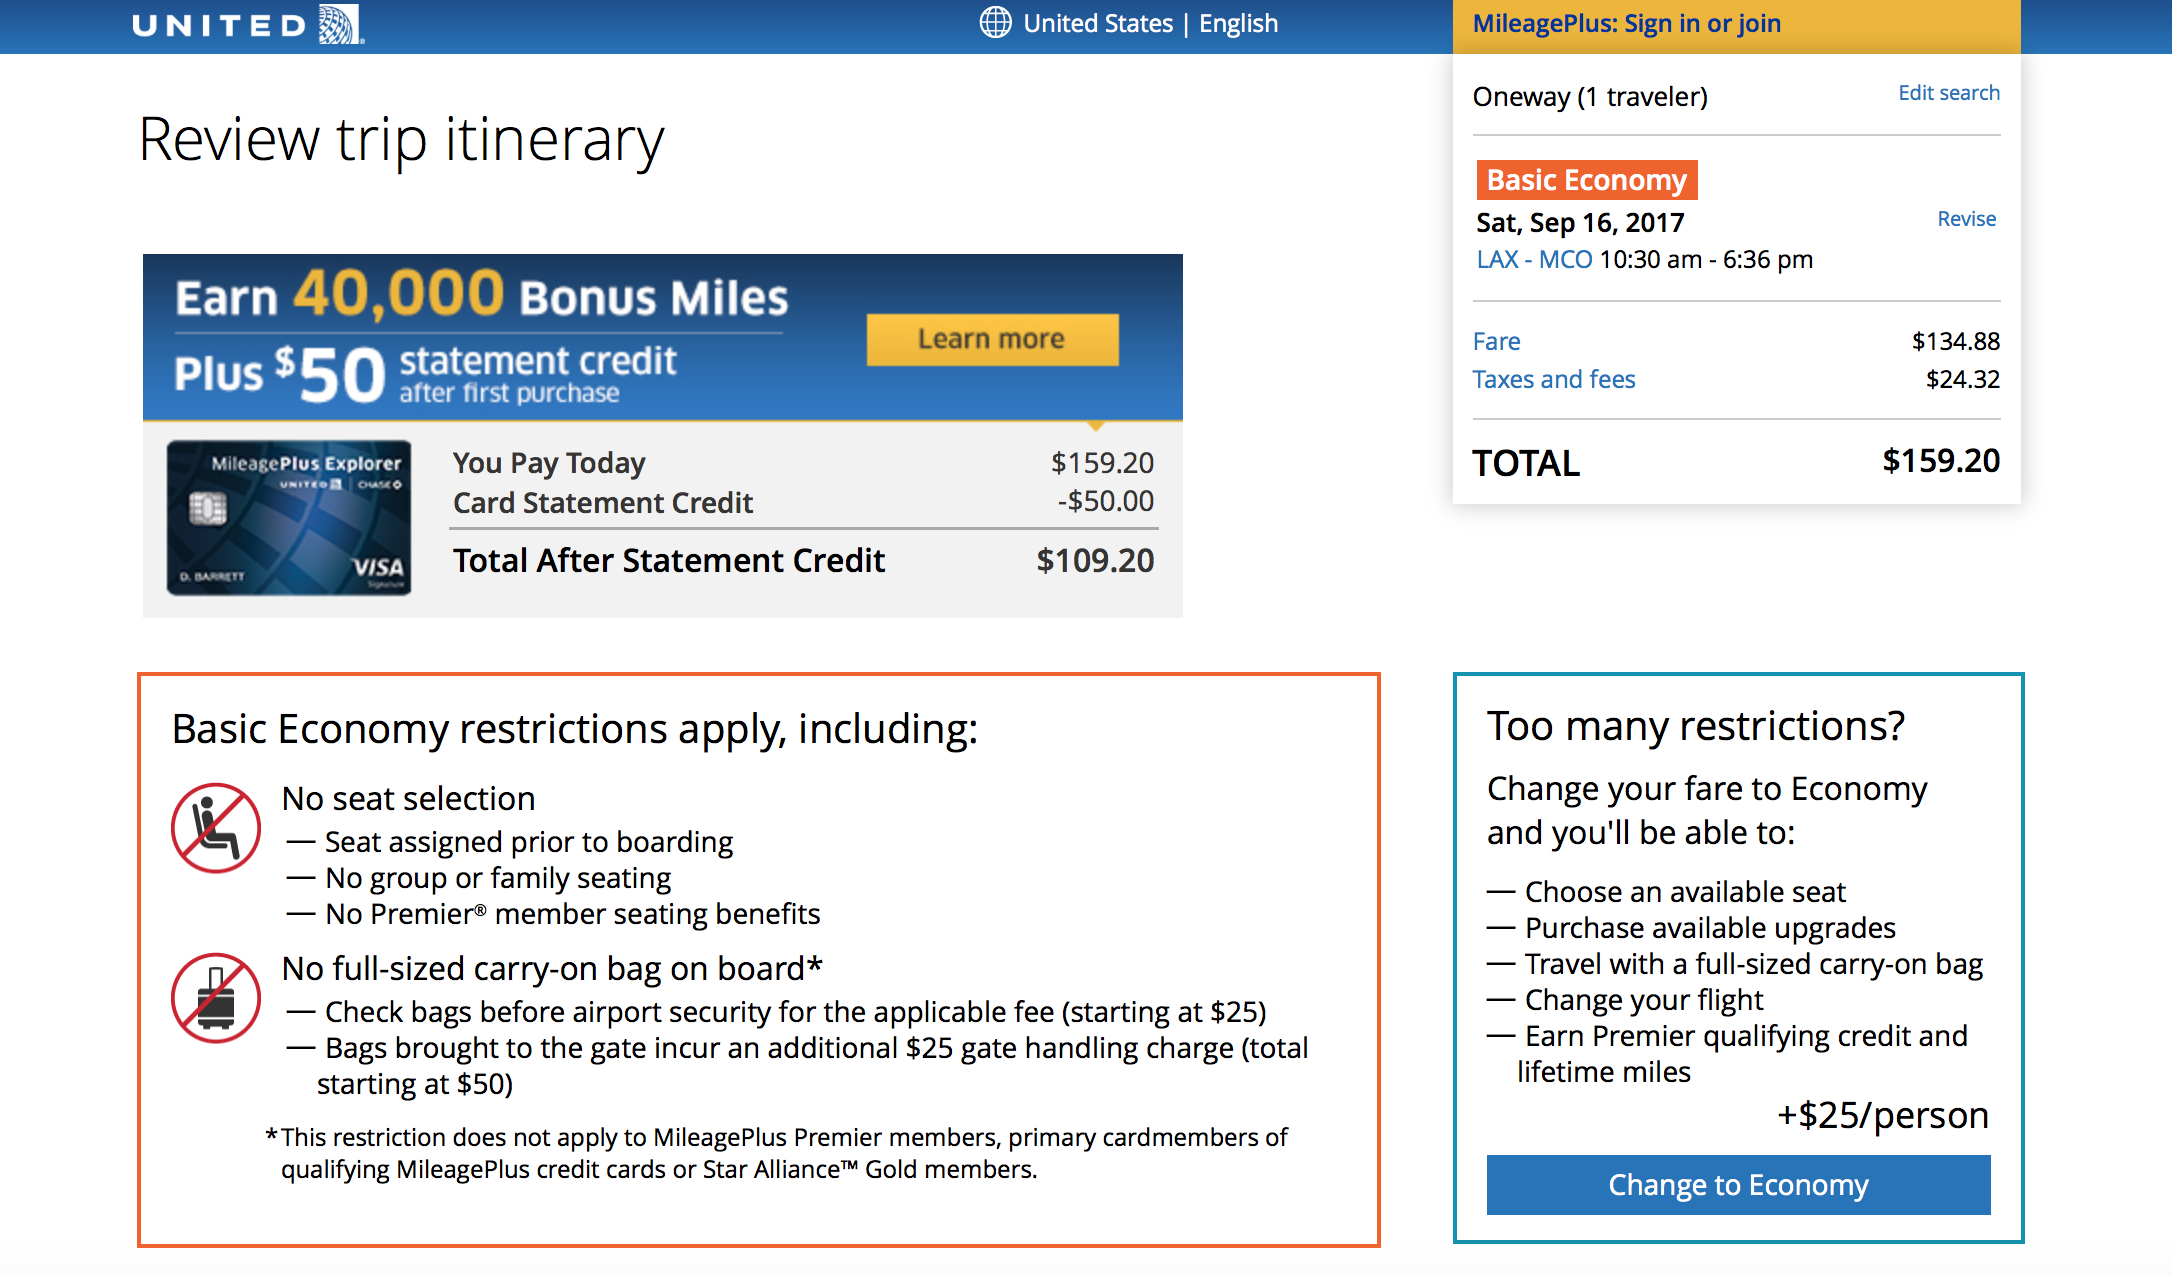 WATCH THIS before you book United Airlines BASIC ECONOMY ticket